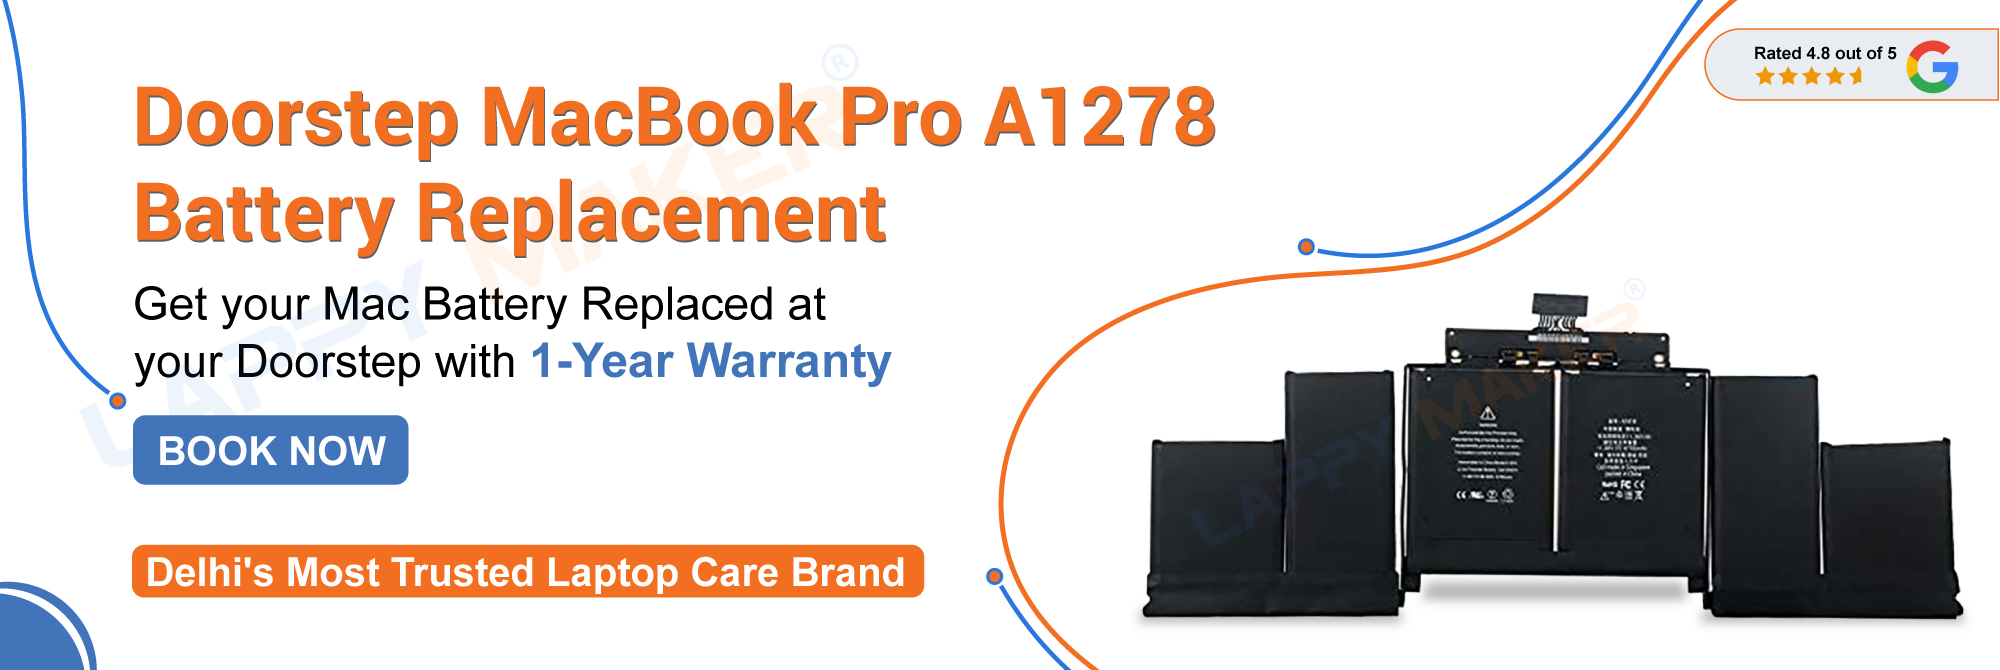 macbook pro A1278 battery replacement